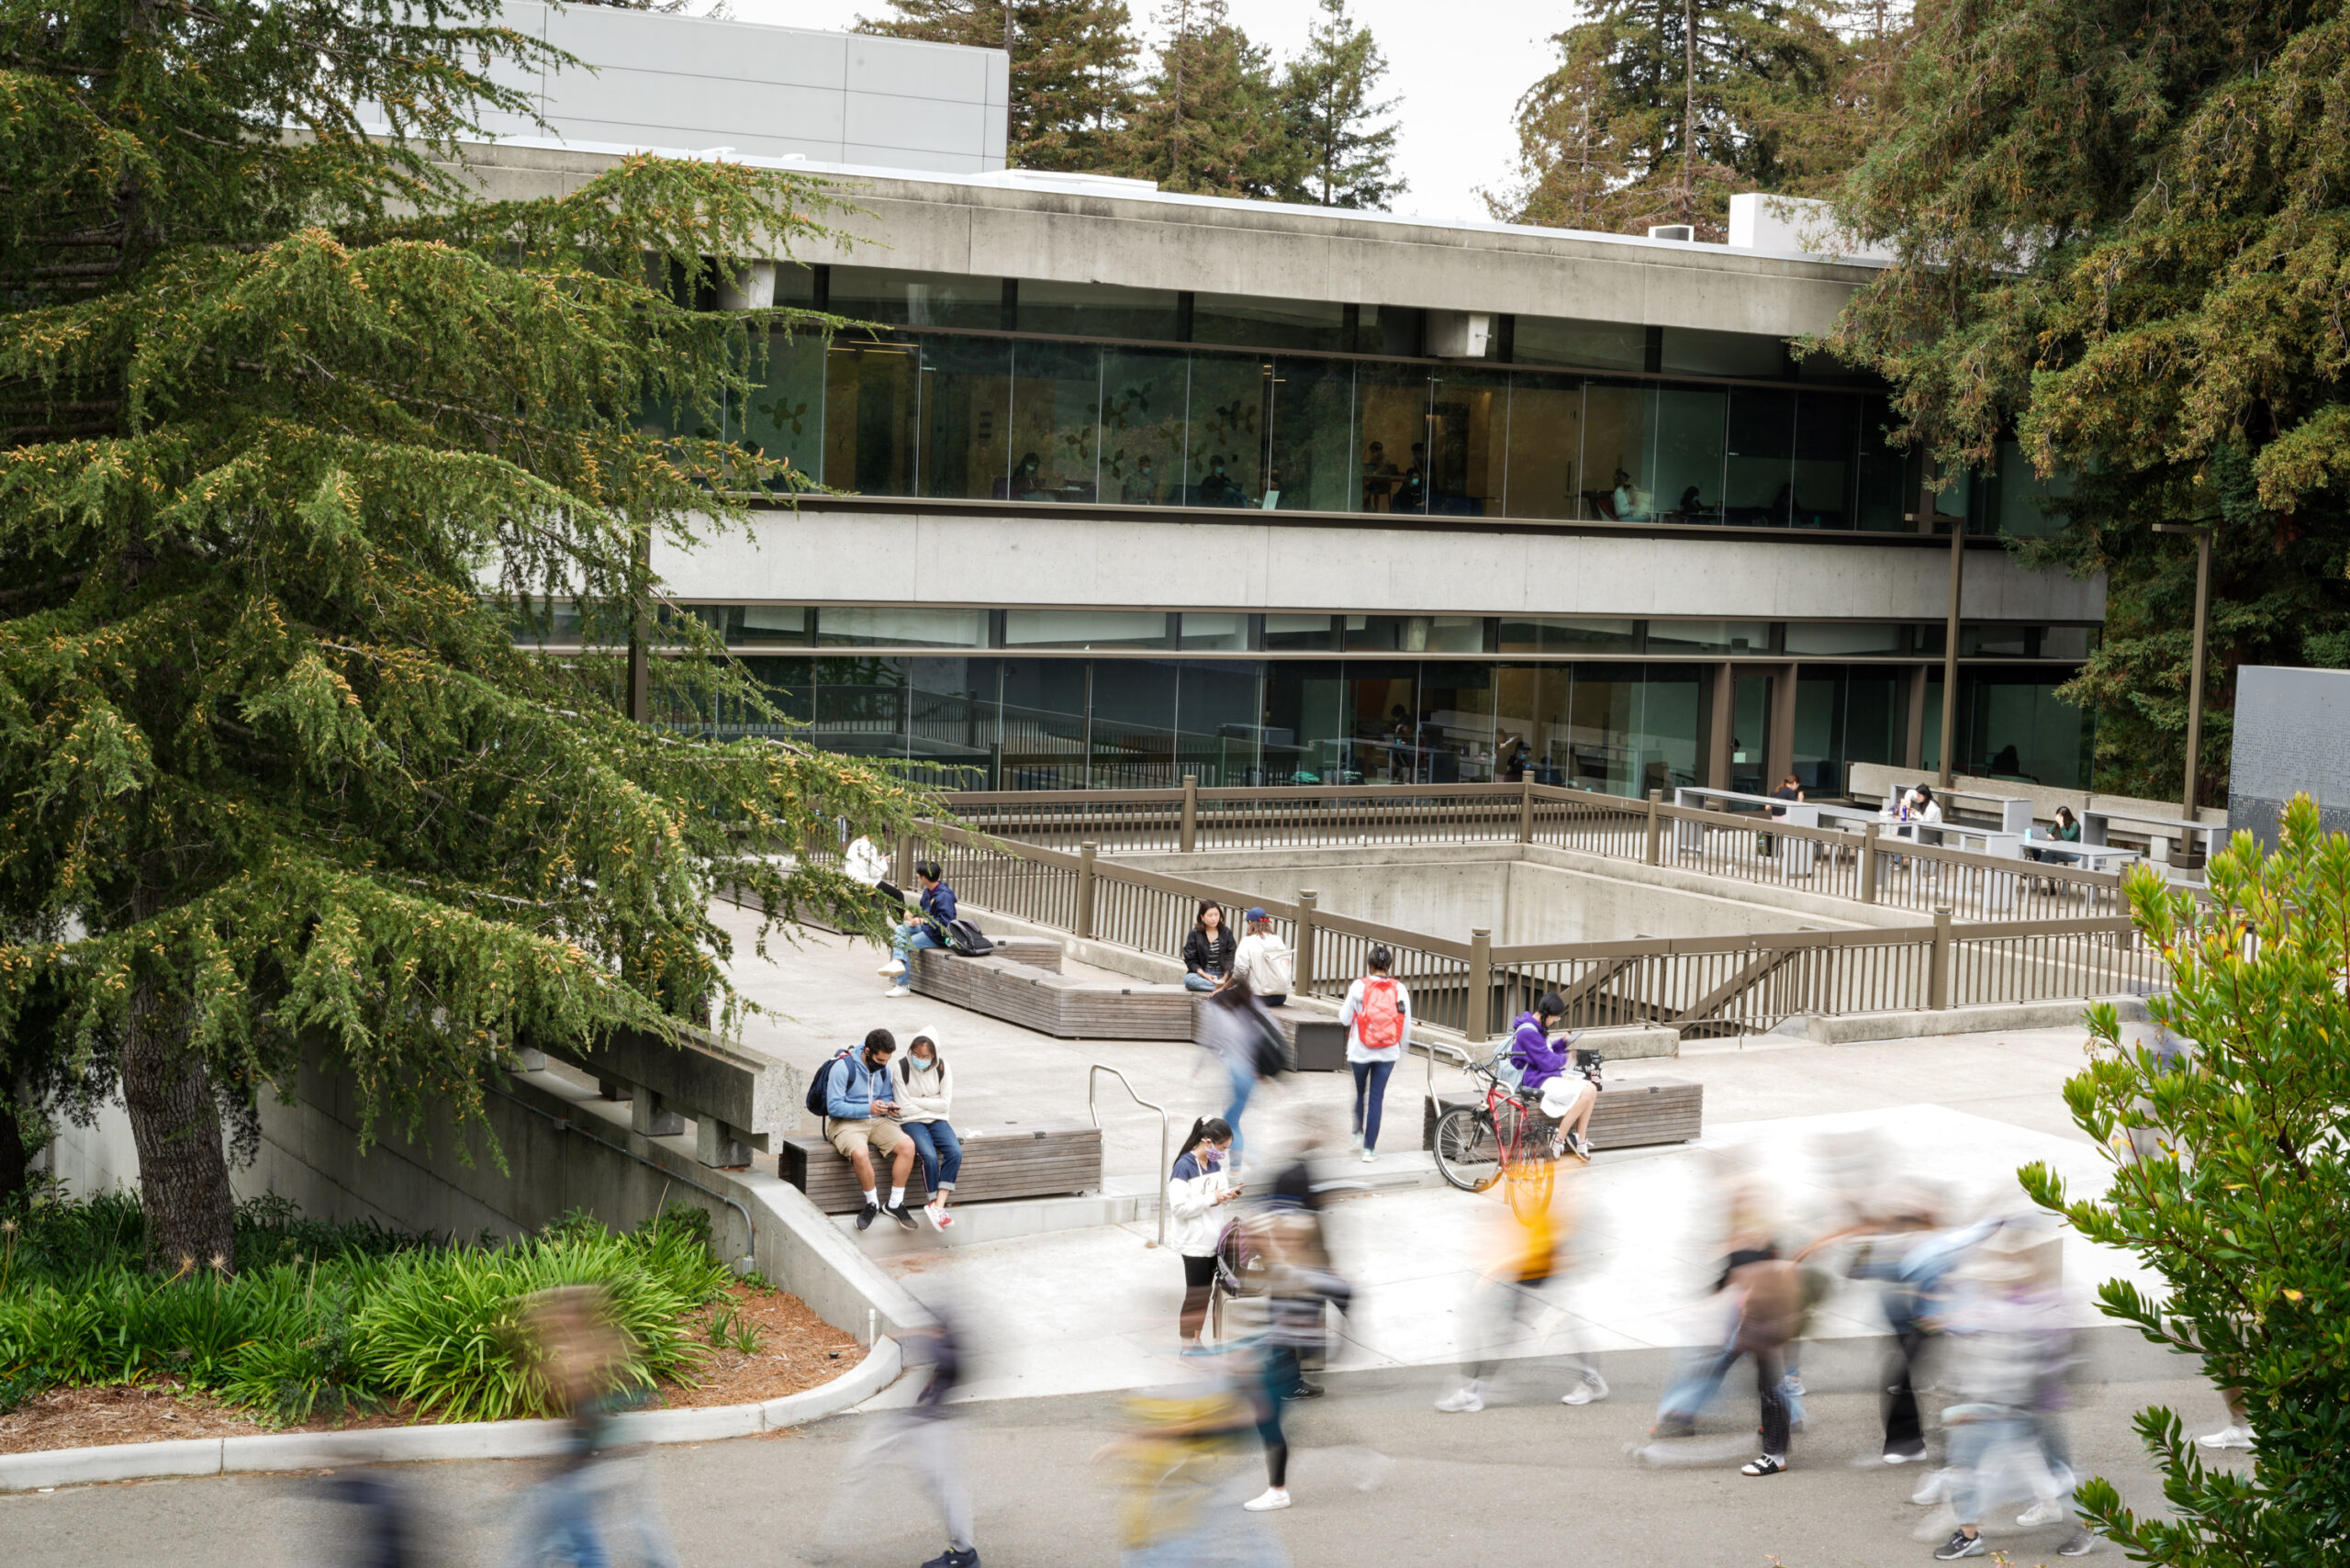 People walk near Moffitt Library on a cloudy day, Sept. 27, 2021. (Photo by Jami Smith for the UC Berkeley Library)